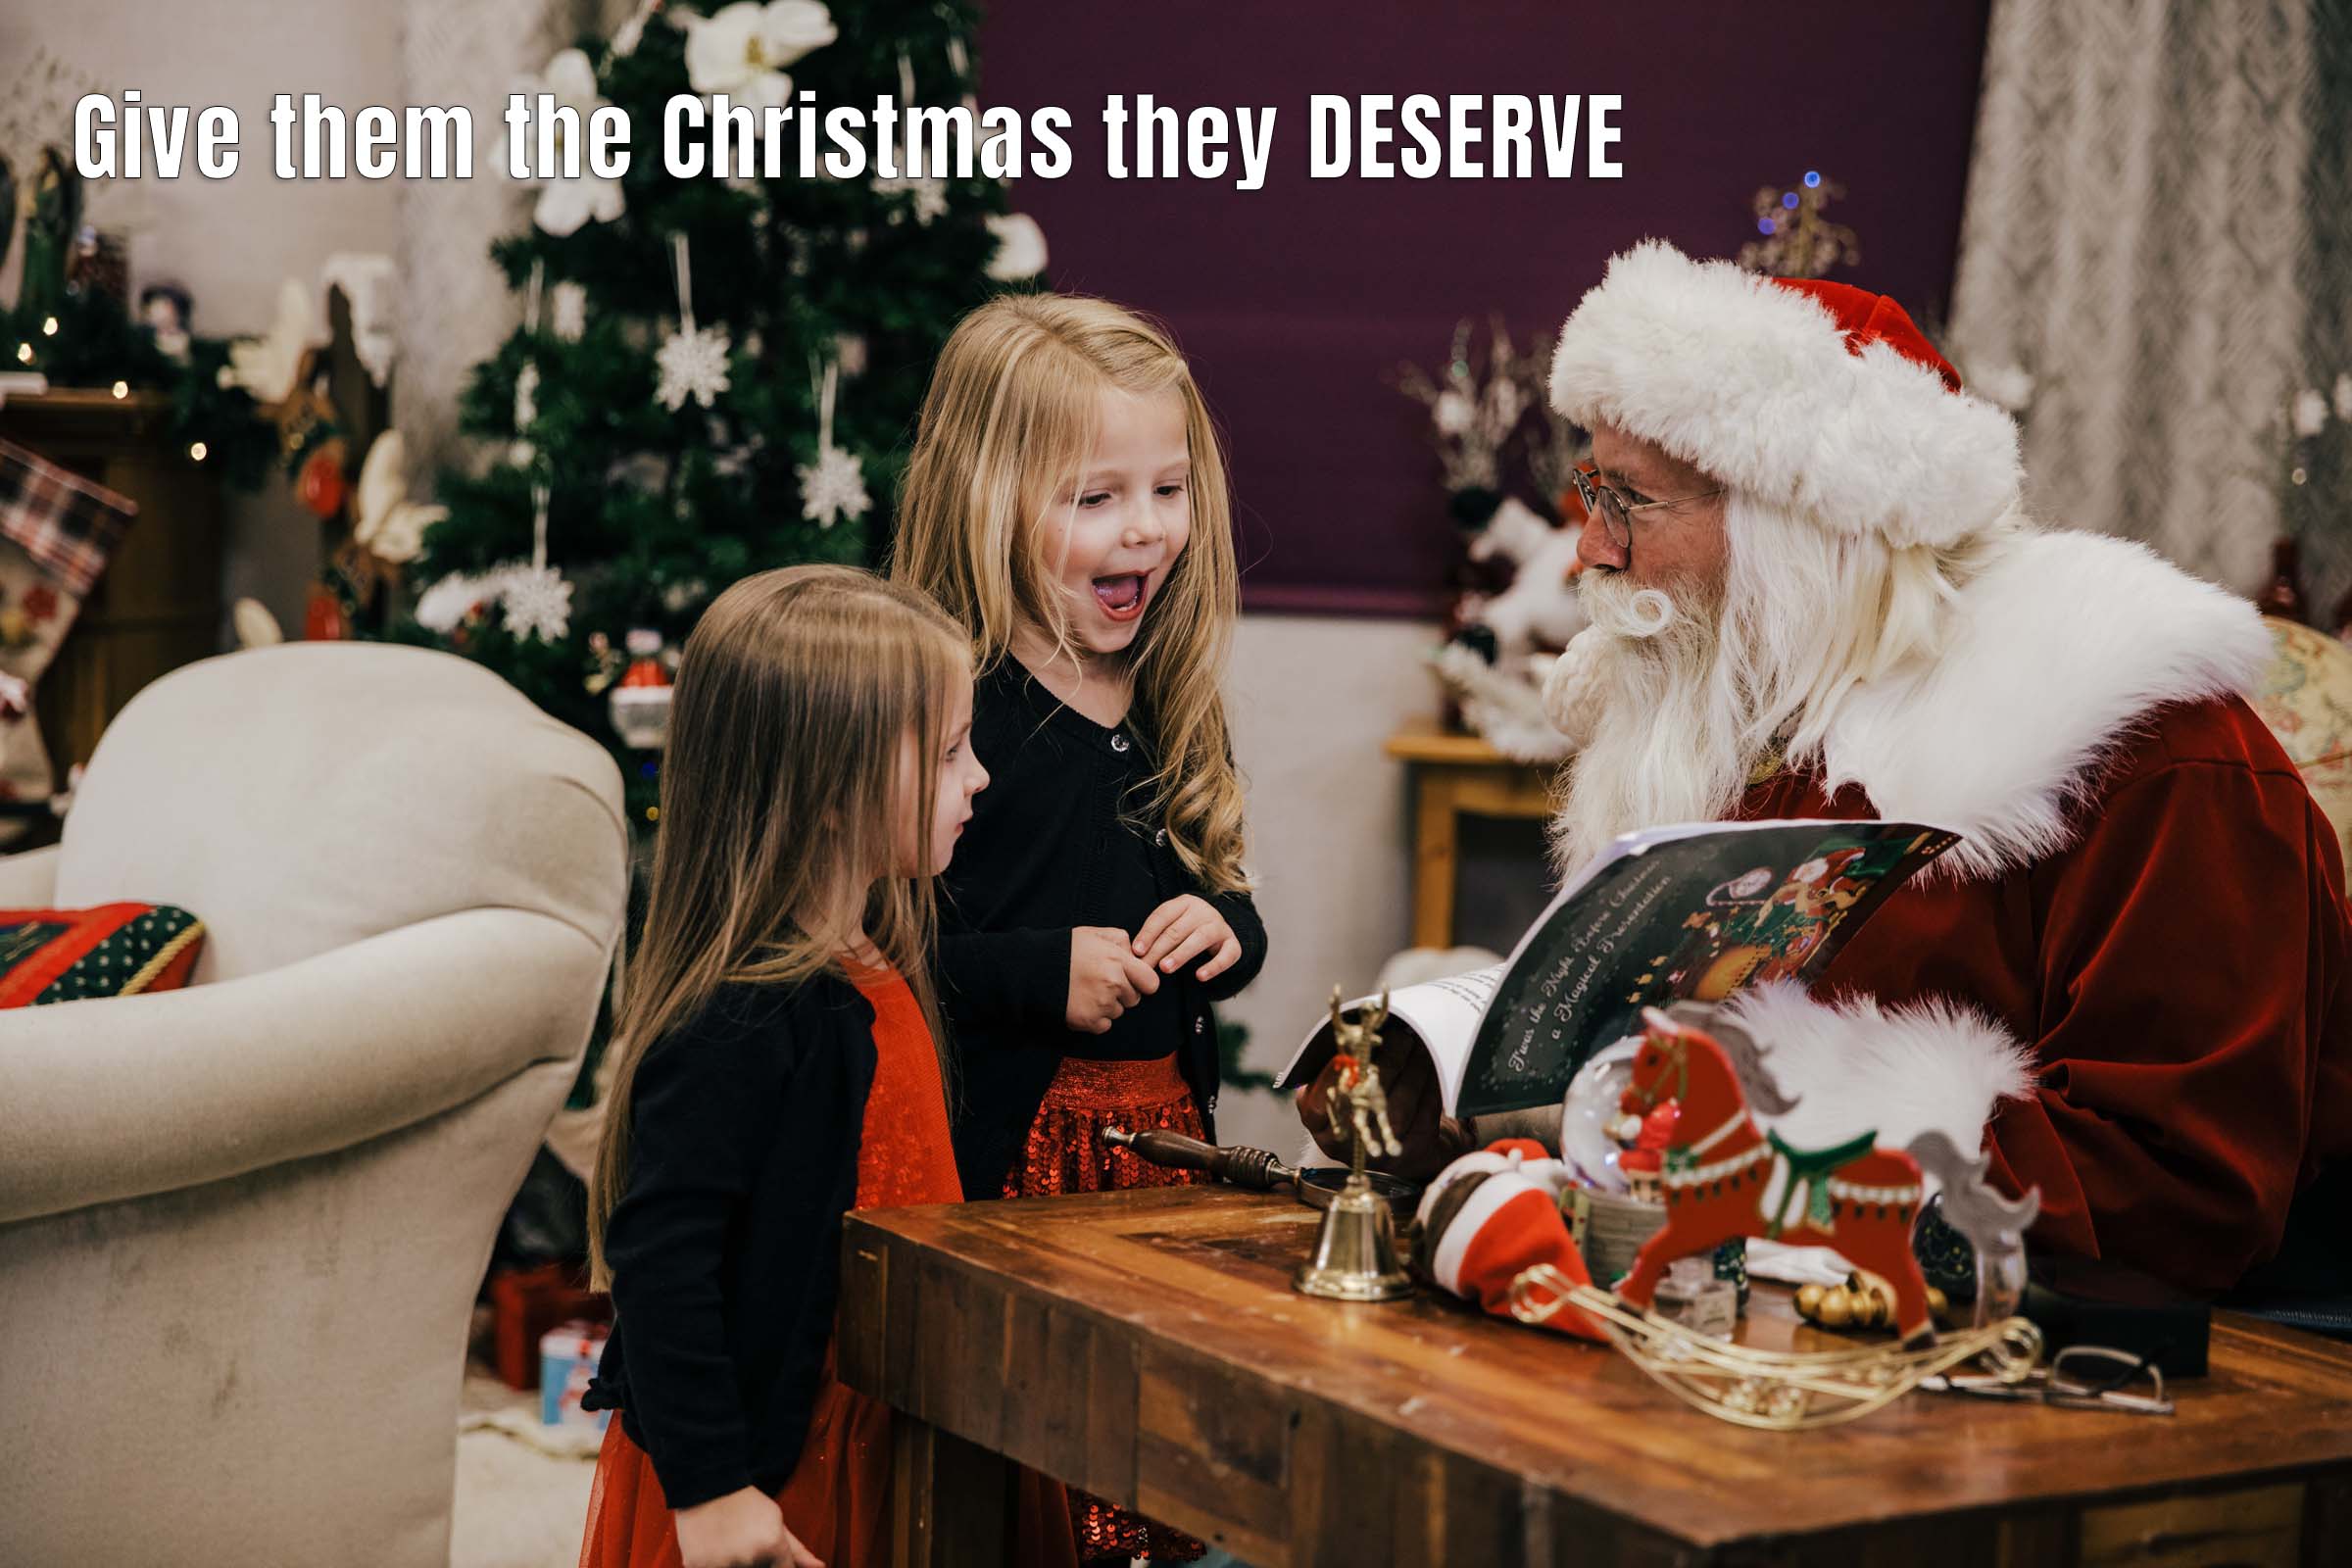 Image says "Give them the Christmas they deserve" and it shows two little girls looking at Santa and smiling big at him delighted